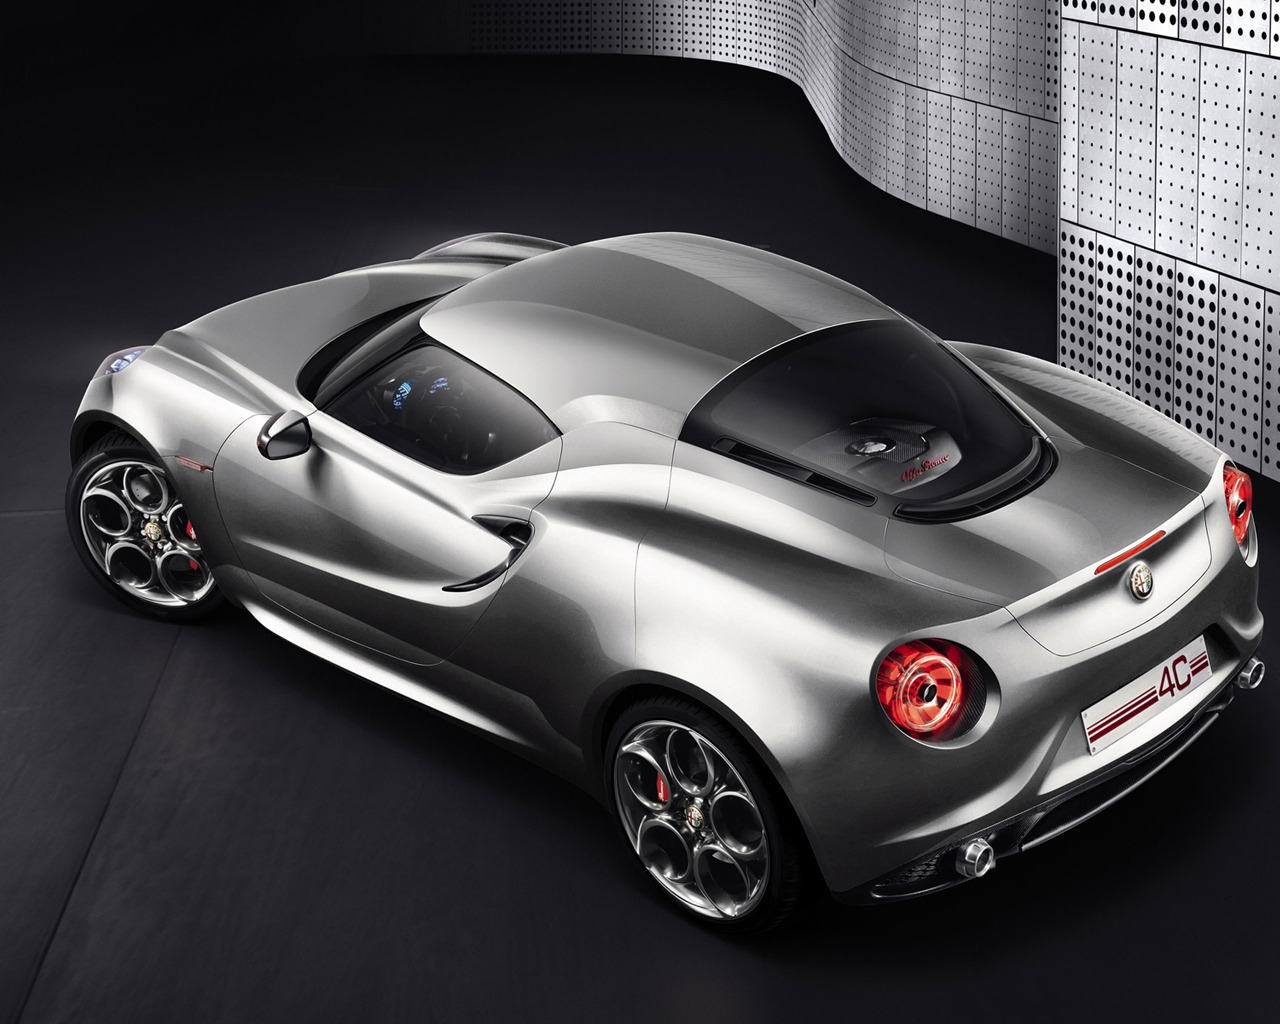 Alfa 4c Concept Rear Top View for 1280 x 1024 resolution